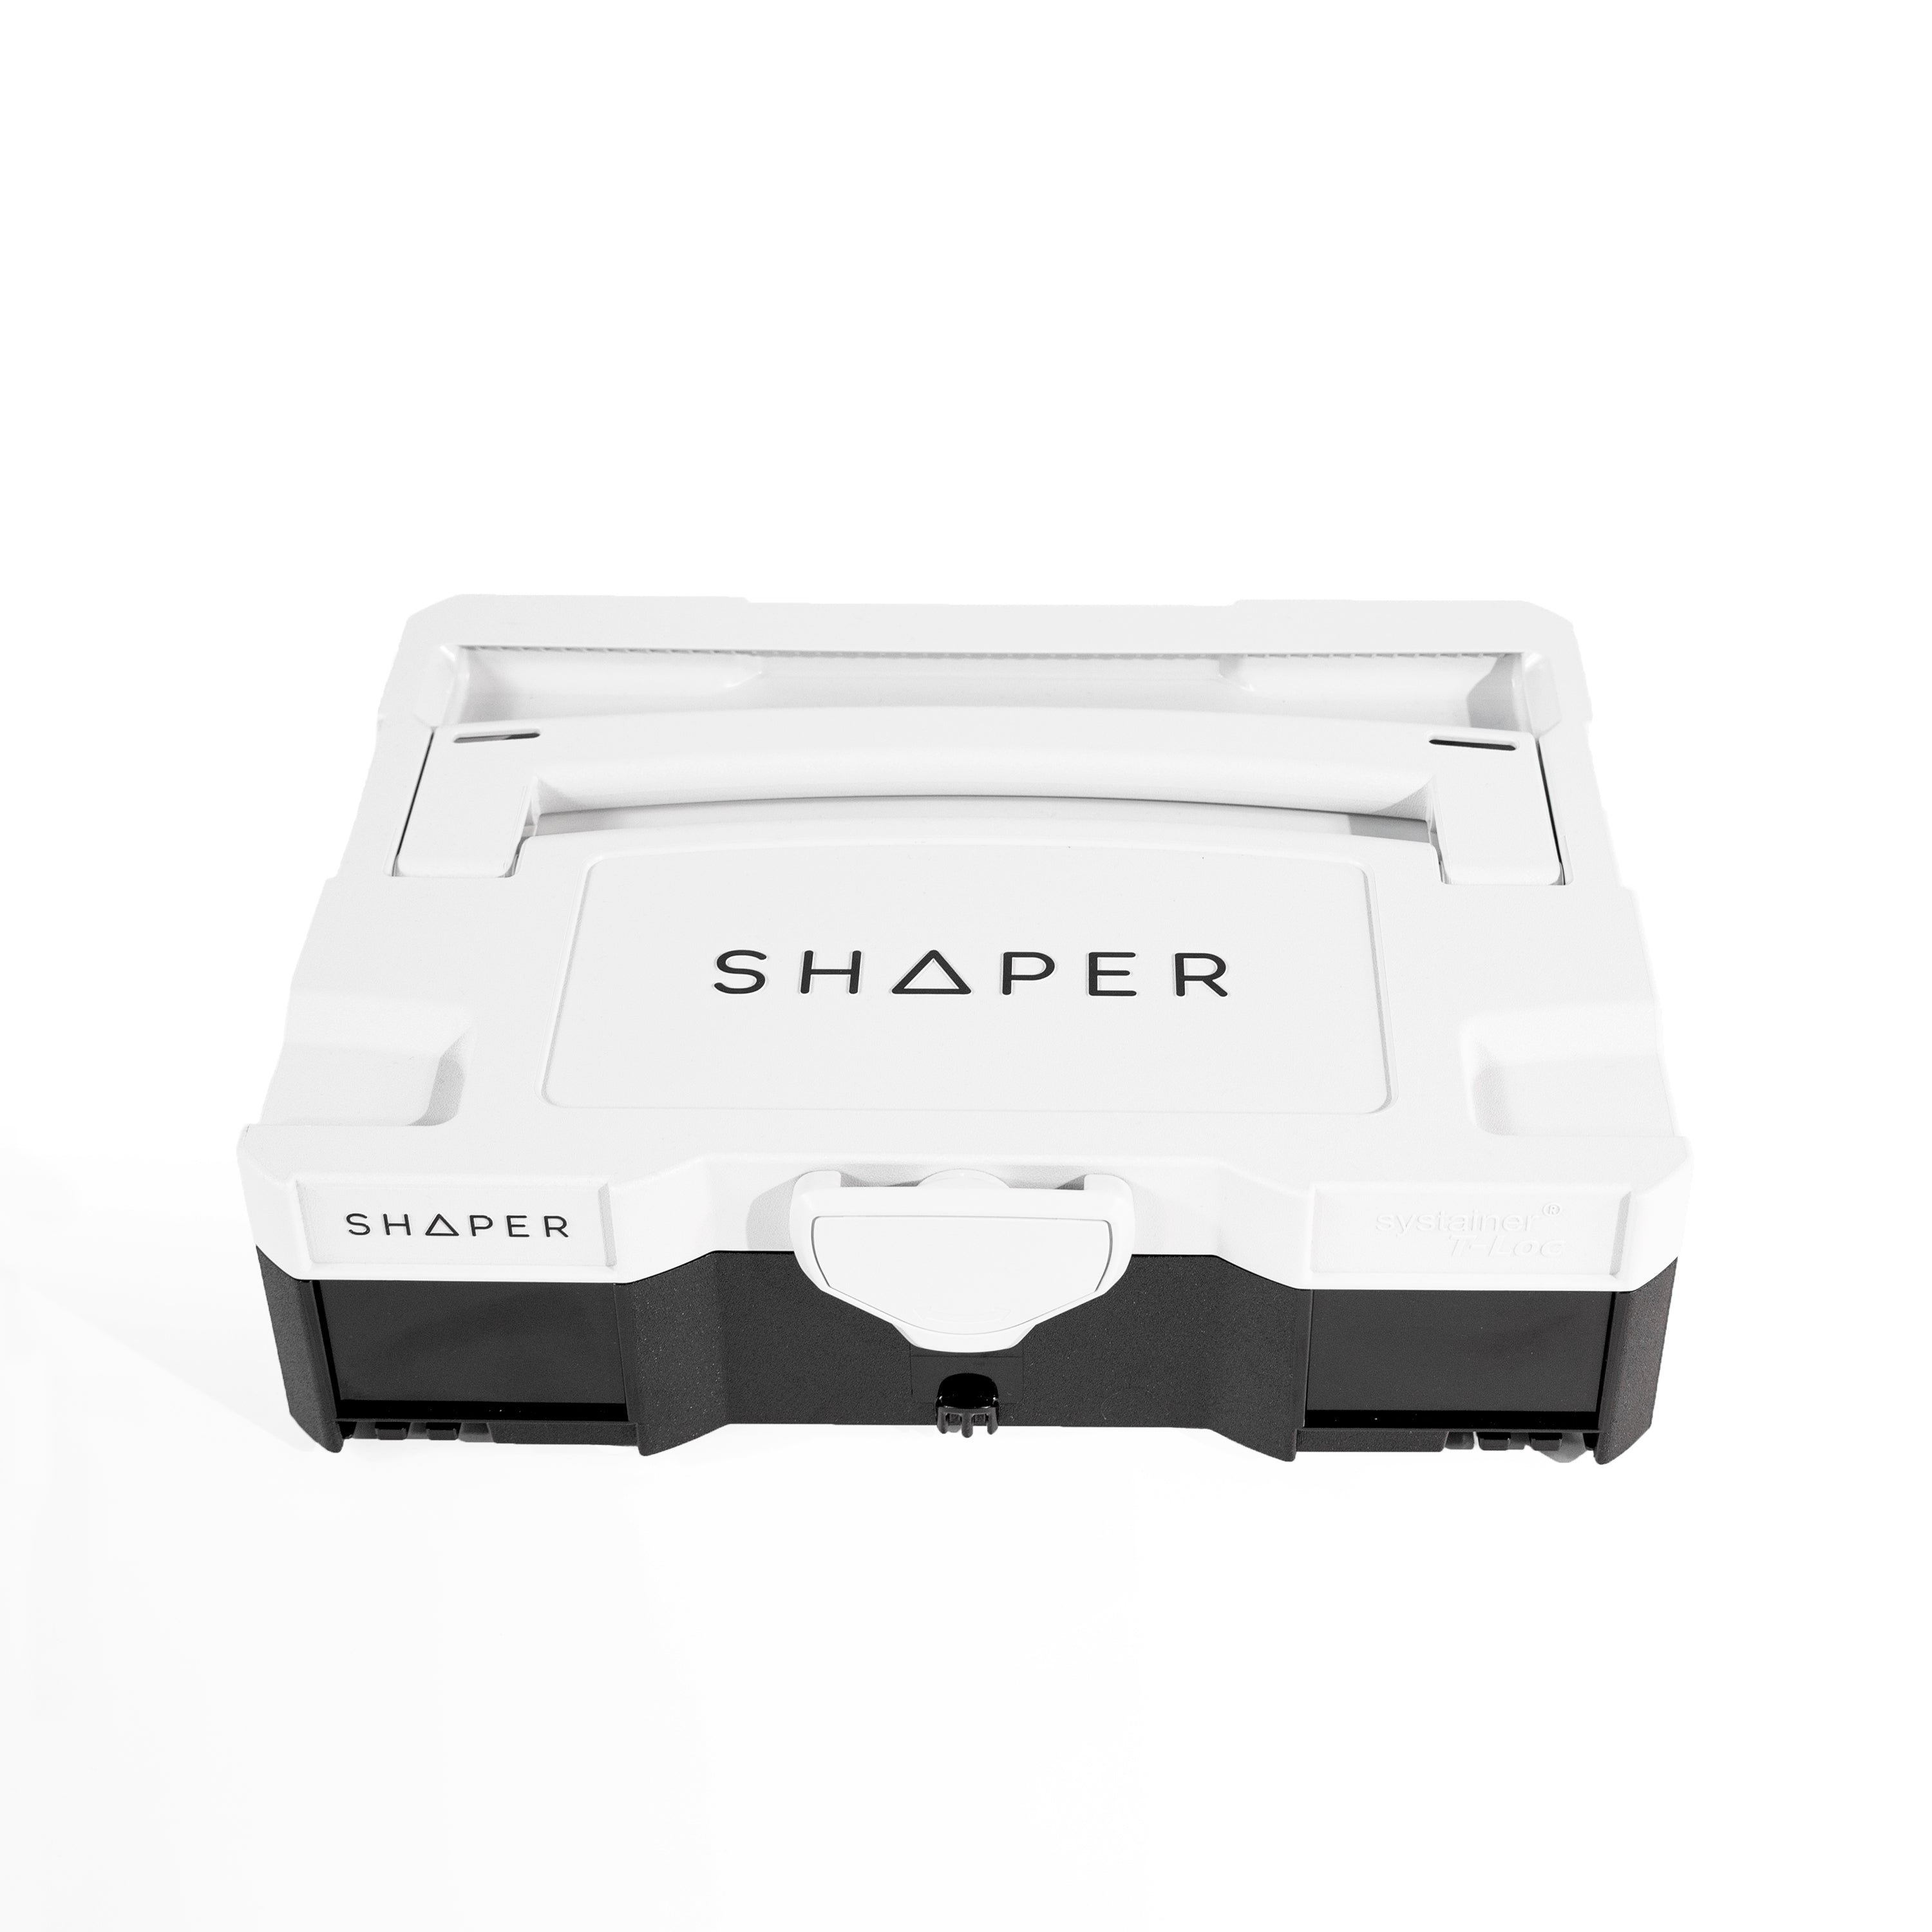 Shaper Tools Customizable Sys 1 Systainer SH1-SS1